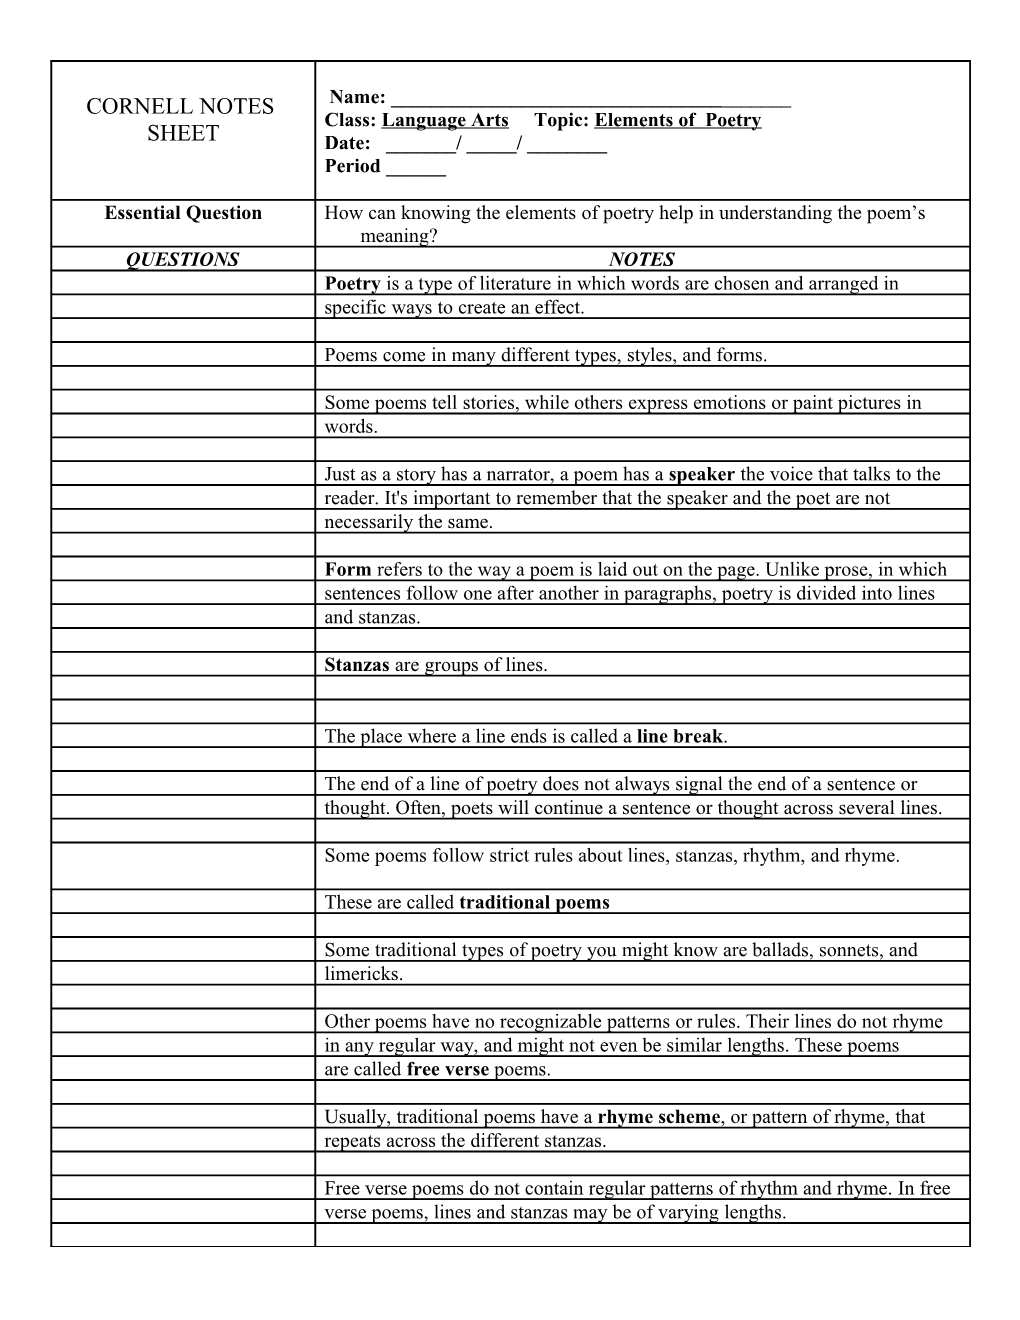 Cornell Notes Sheet